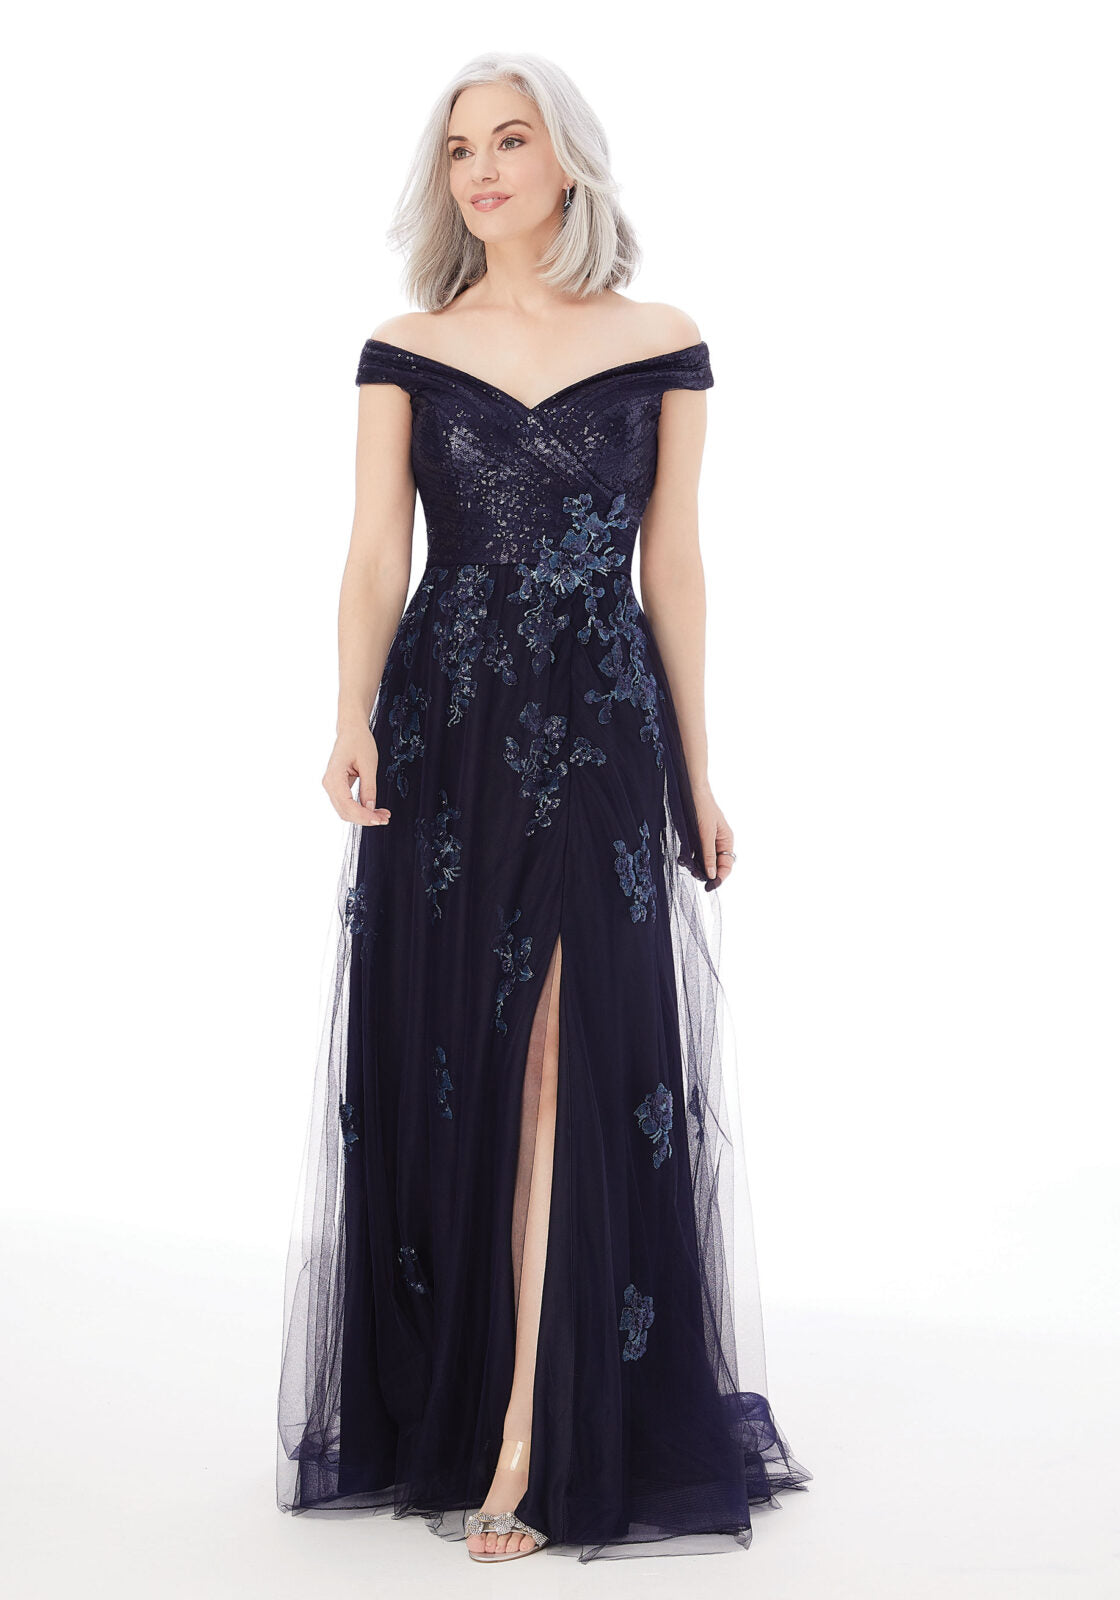 A-line Evening Gown With Beading And Appliqués On Net Morilee